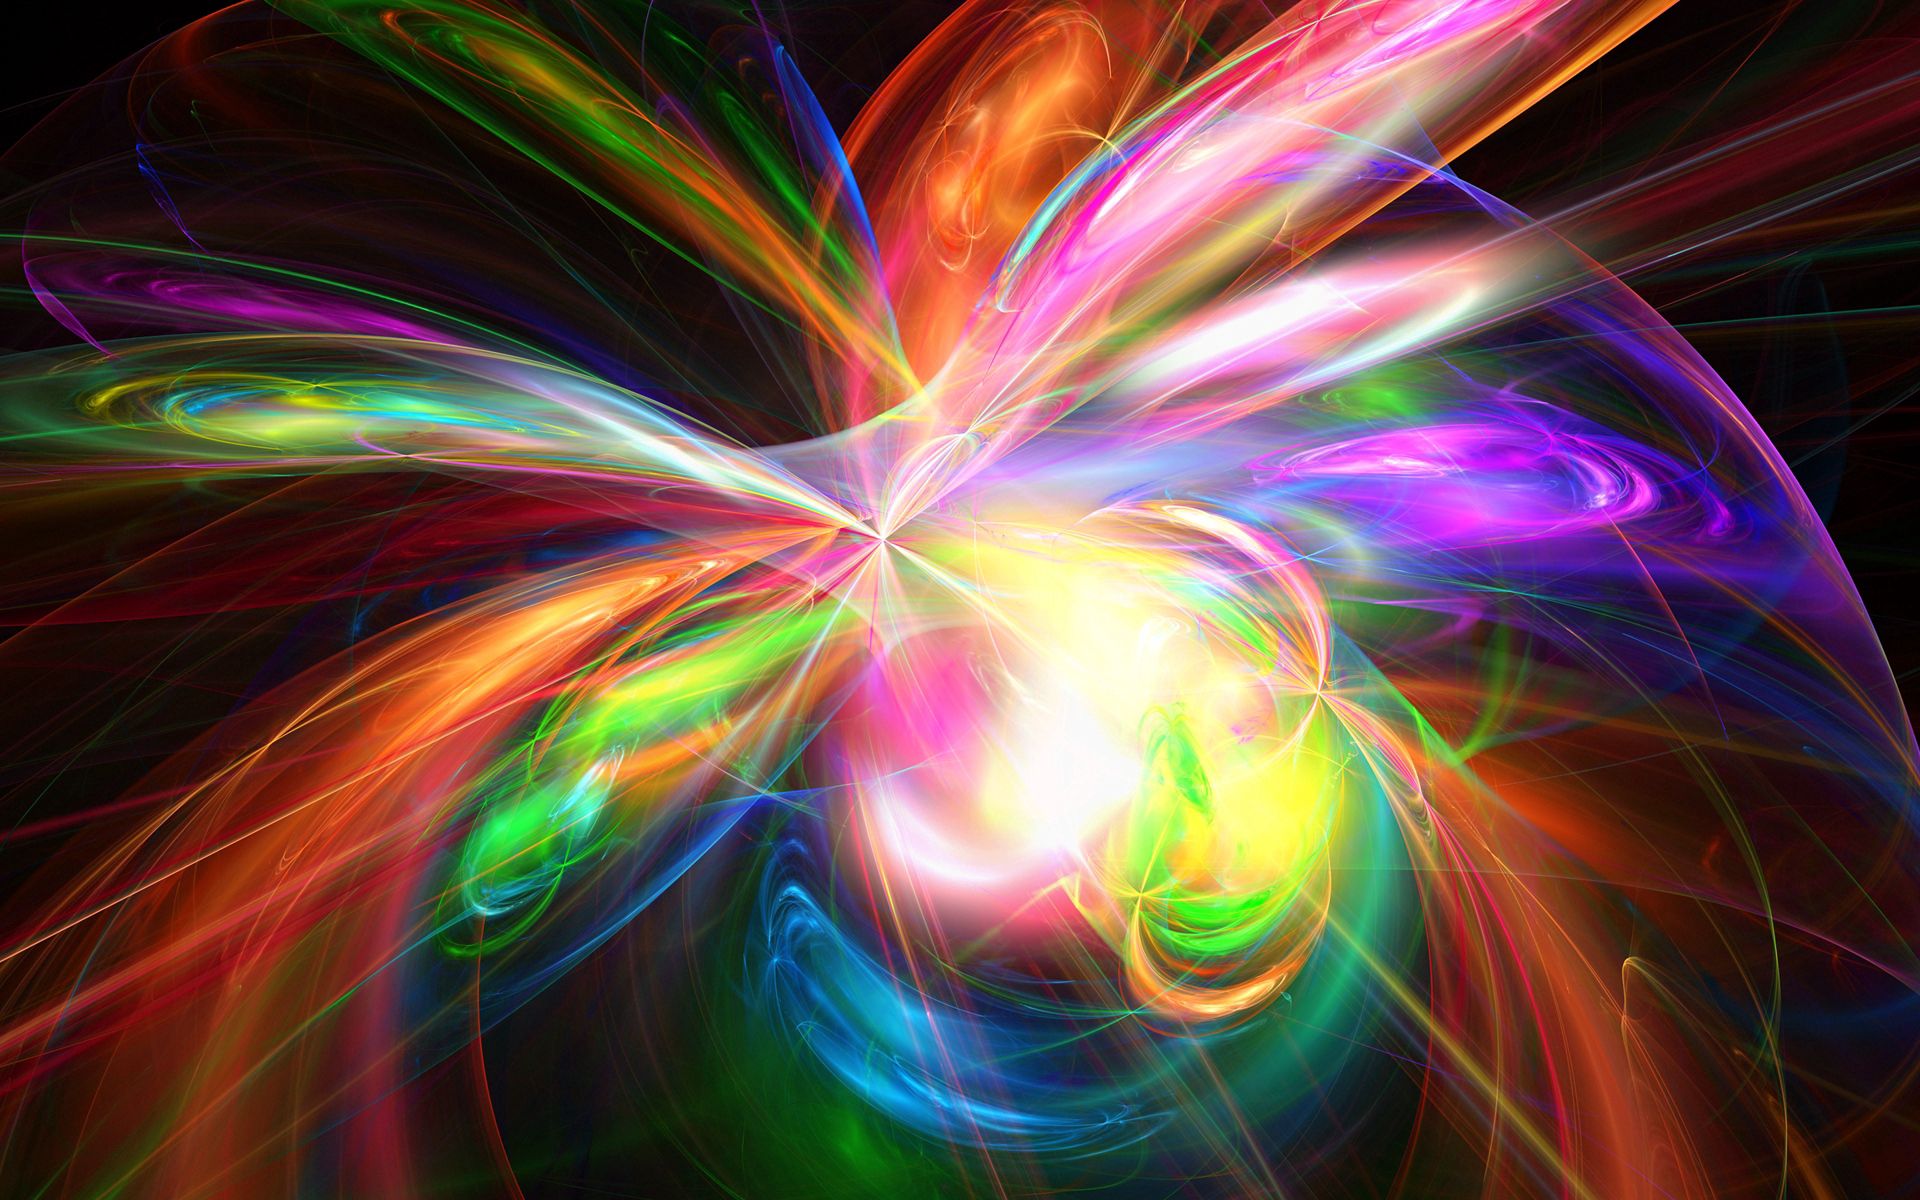 118867 free wallpaper 320x480 for phone, download images colourful, rainbow, iridescent, colorful 320x480 for mobile